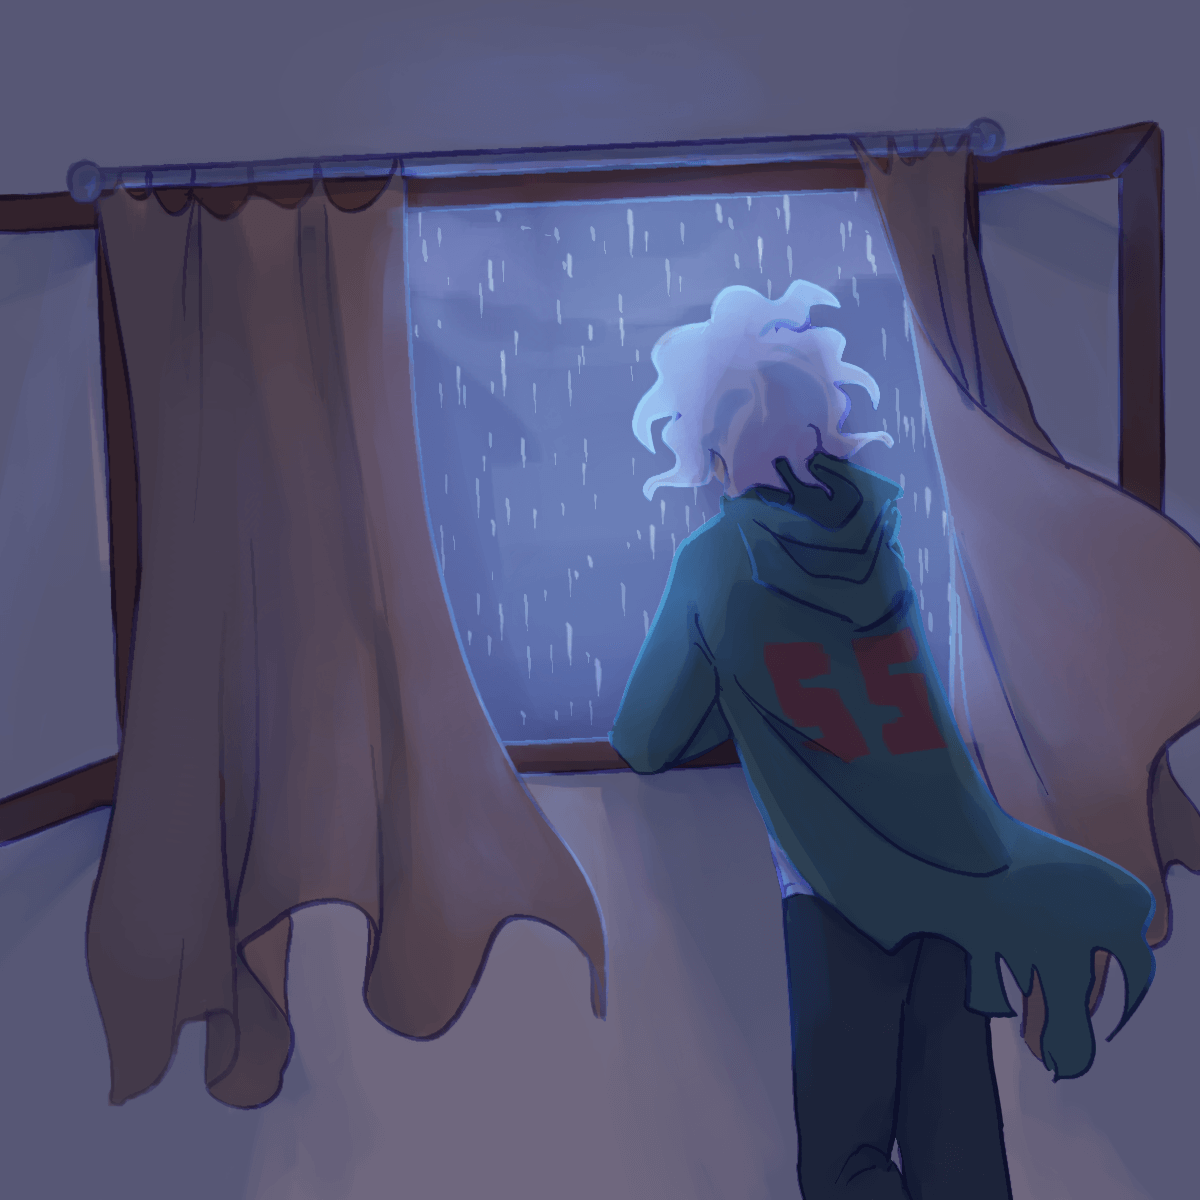 a drawing of nagito standing by a window and looking out into the rain. the curtains
		and his coat are swaying in the wind. the lighting is dim.